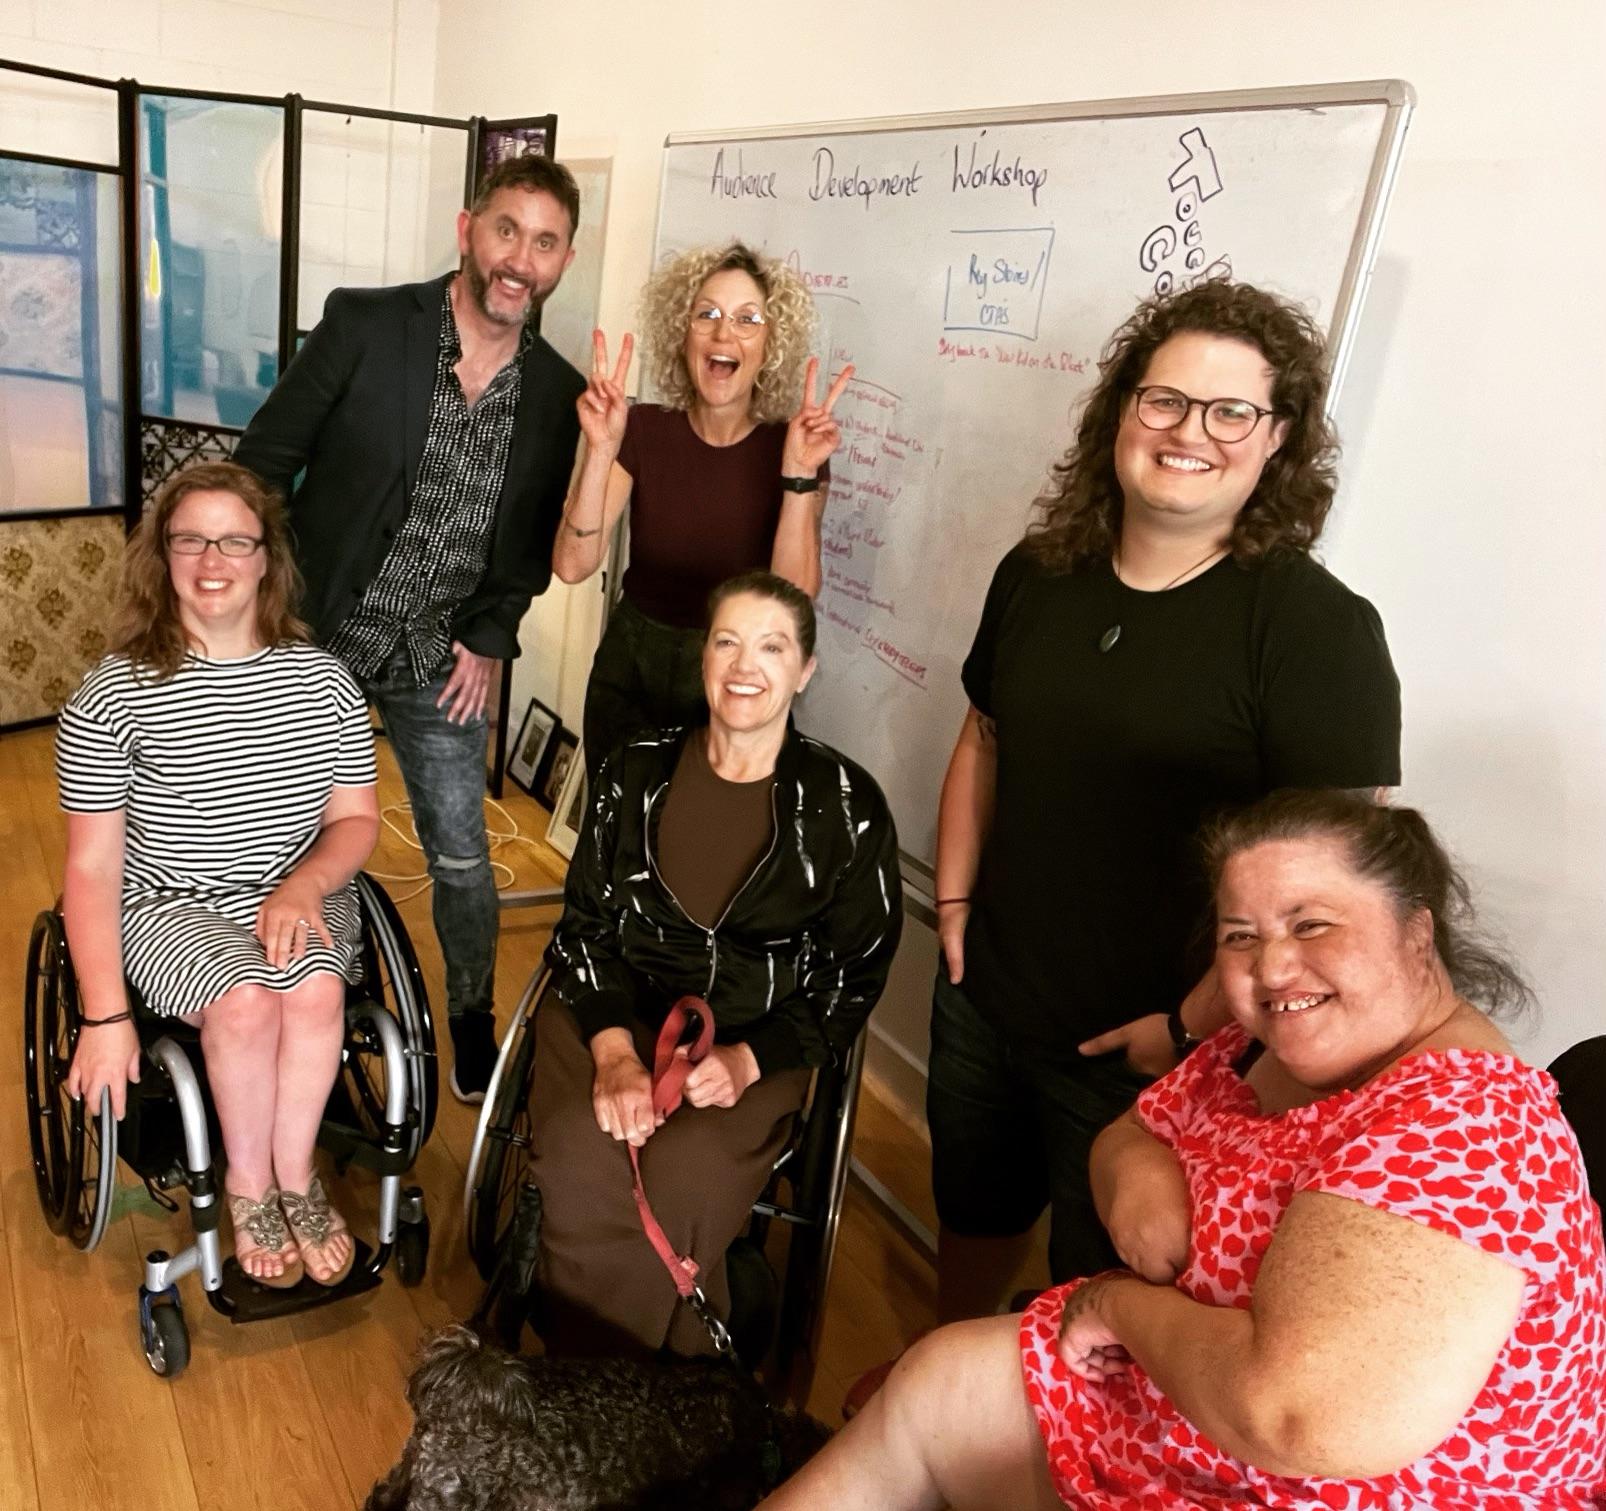 Six people in front of a whiteboard - Three standing behind three people sitting in wheelchairs.